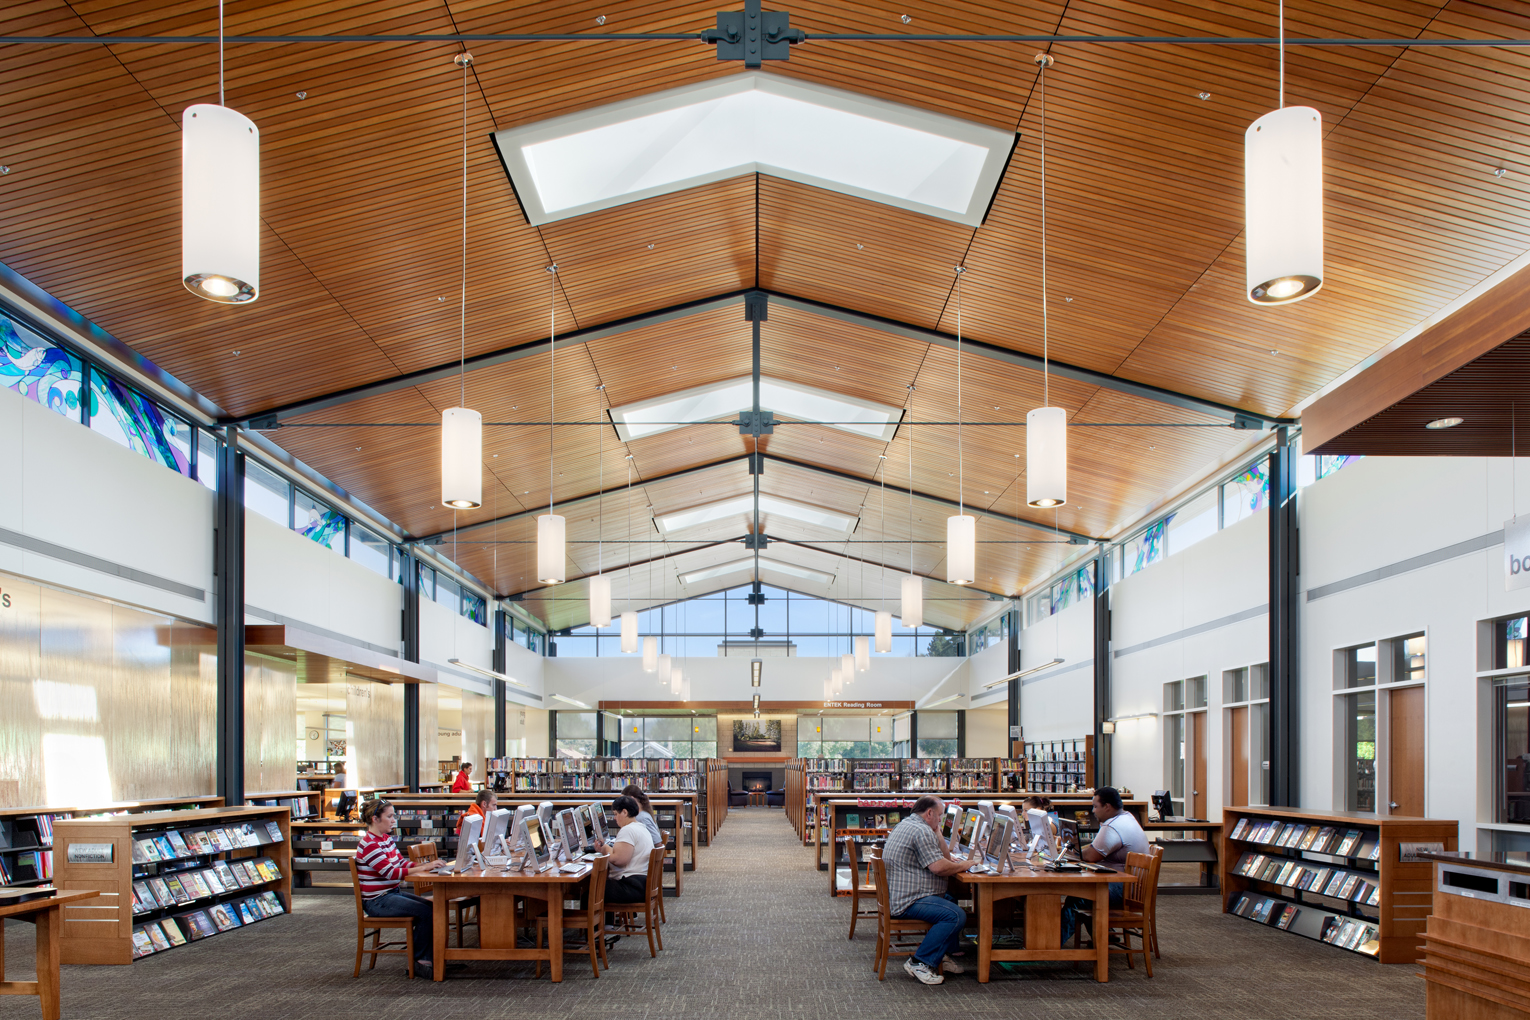 Lebanon Public Library. A large, open library reading room with tables and computers in teh foreground and library collections in the background. The wood-clad ceiling is very high and features a pitched roofline and multiple skylights. There are stained glass clearstories along the sides of the roofline, and a triangular one made of transparent glass at the end. In the very back of te building a lit fireplace can be seen at the end of the aisle between stacks.